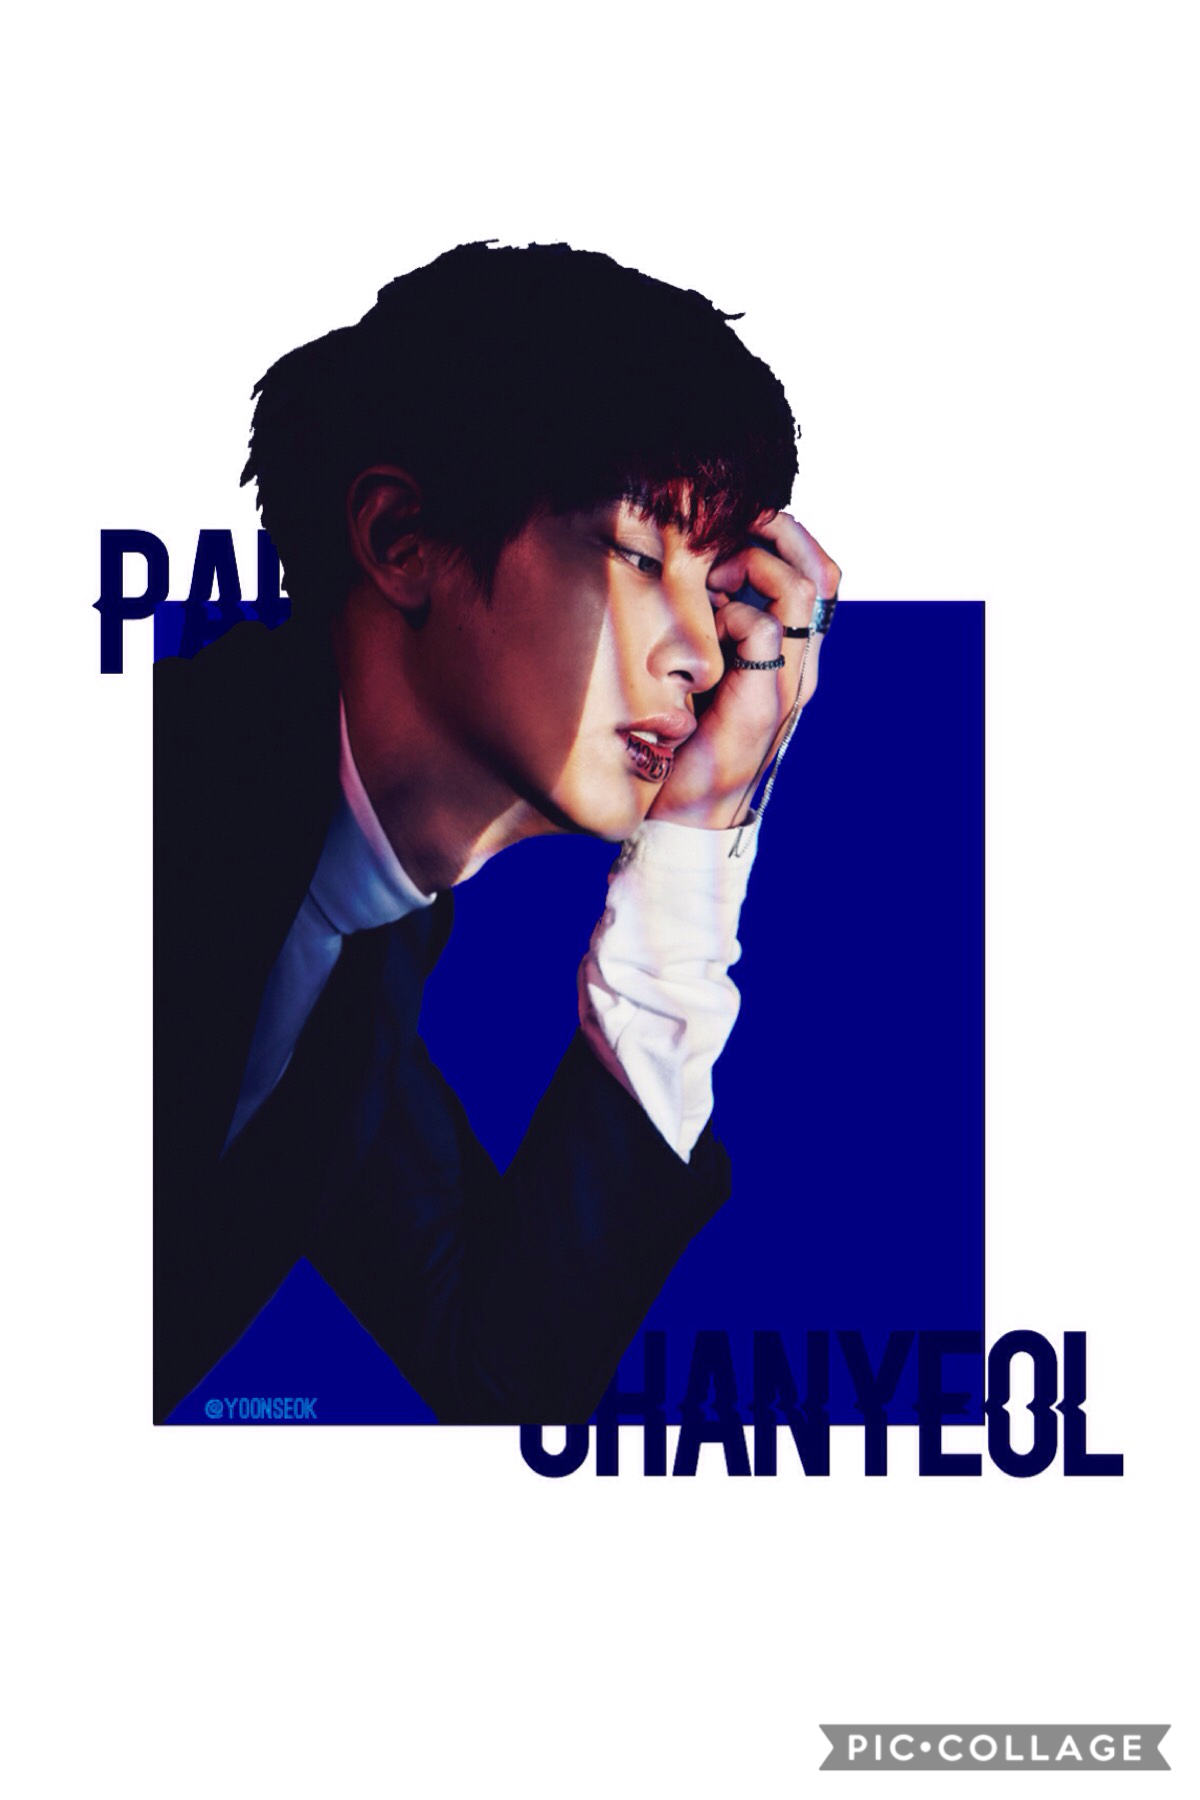 My favourite Chanyeol era. You can see I'm struggling to develop a whole new style😂